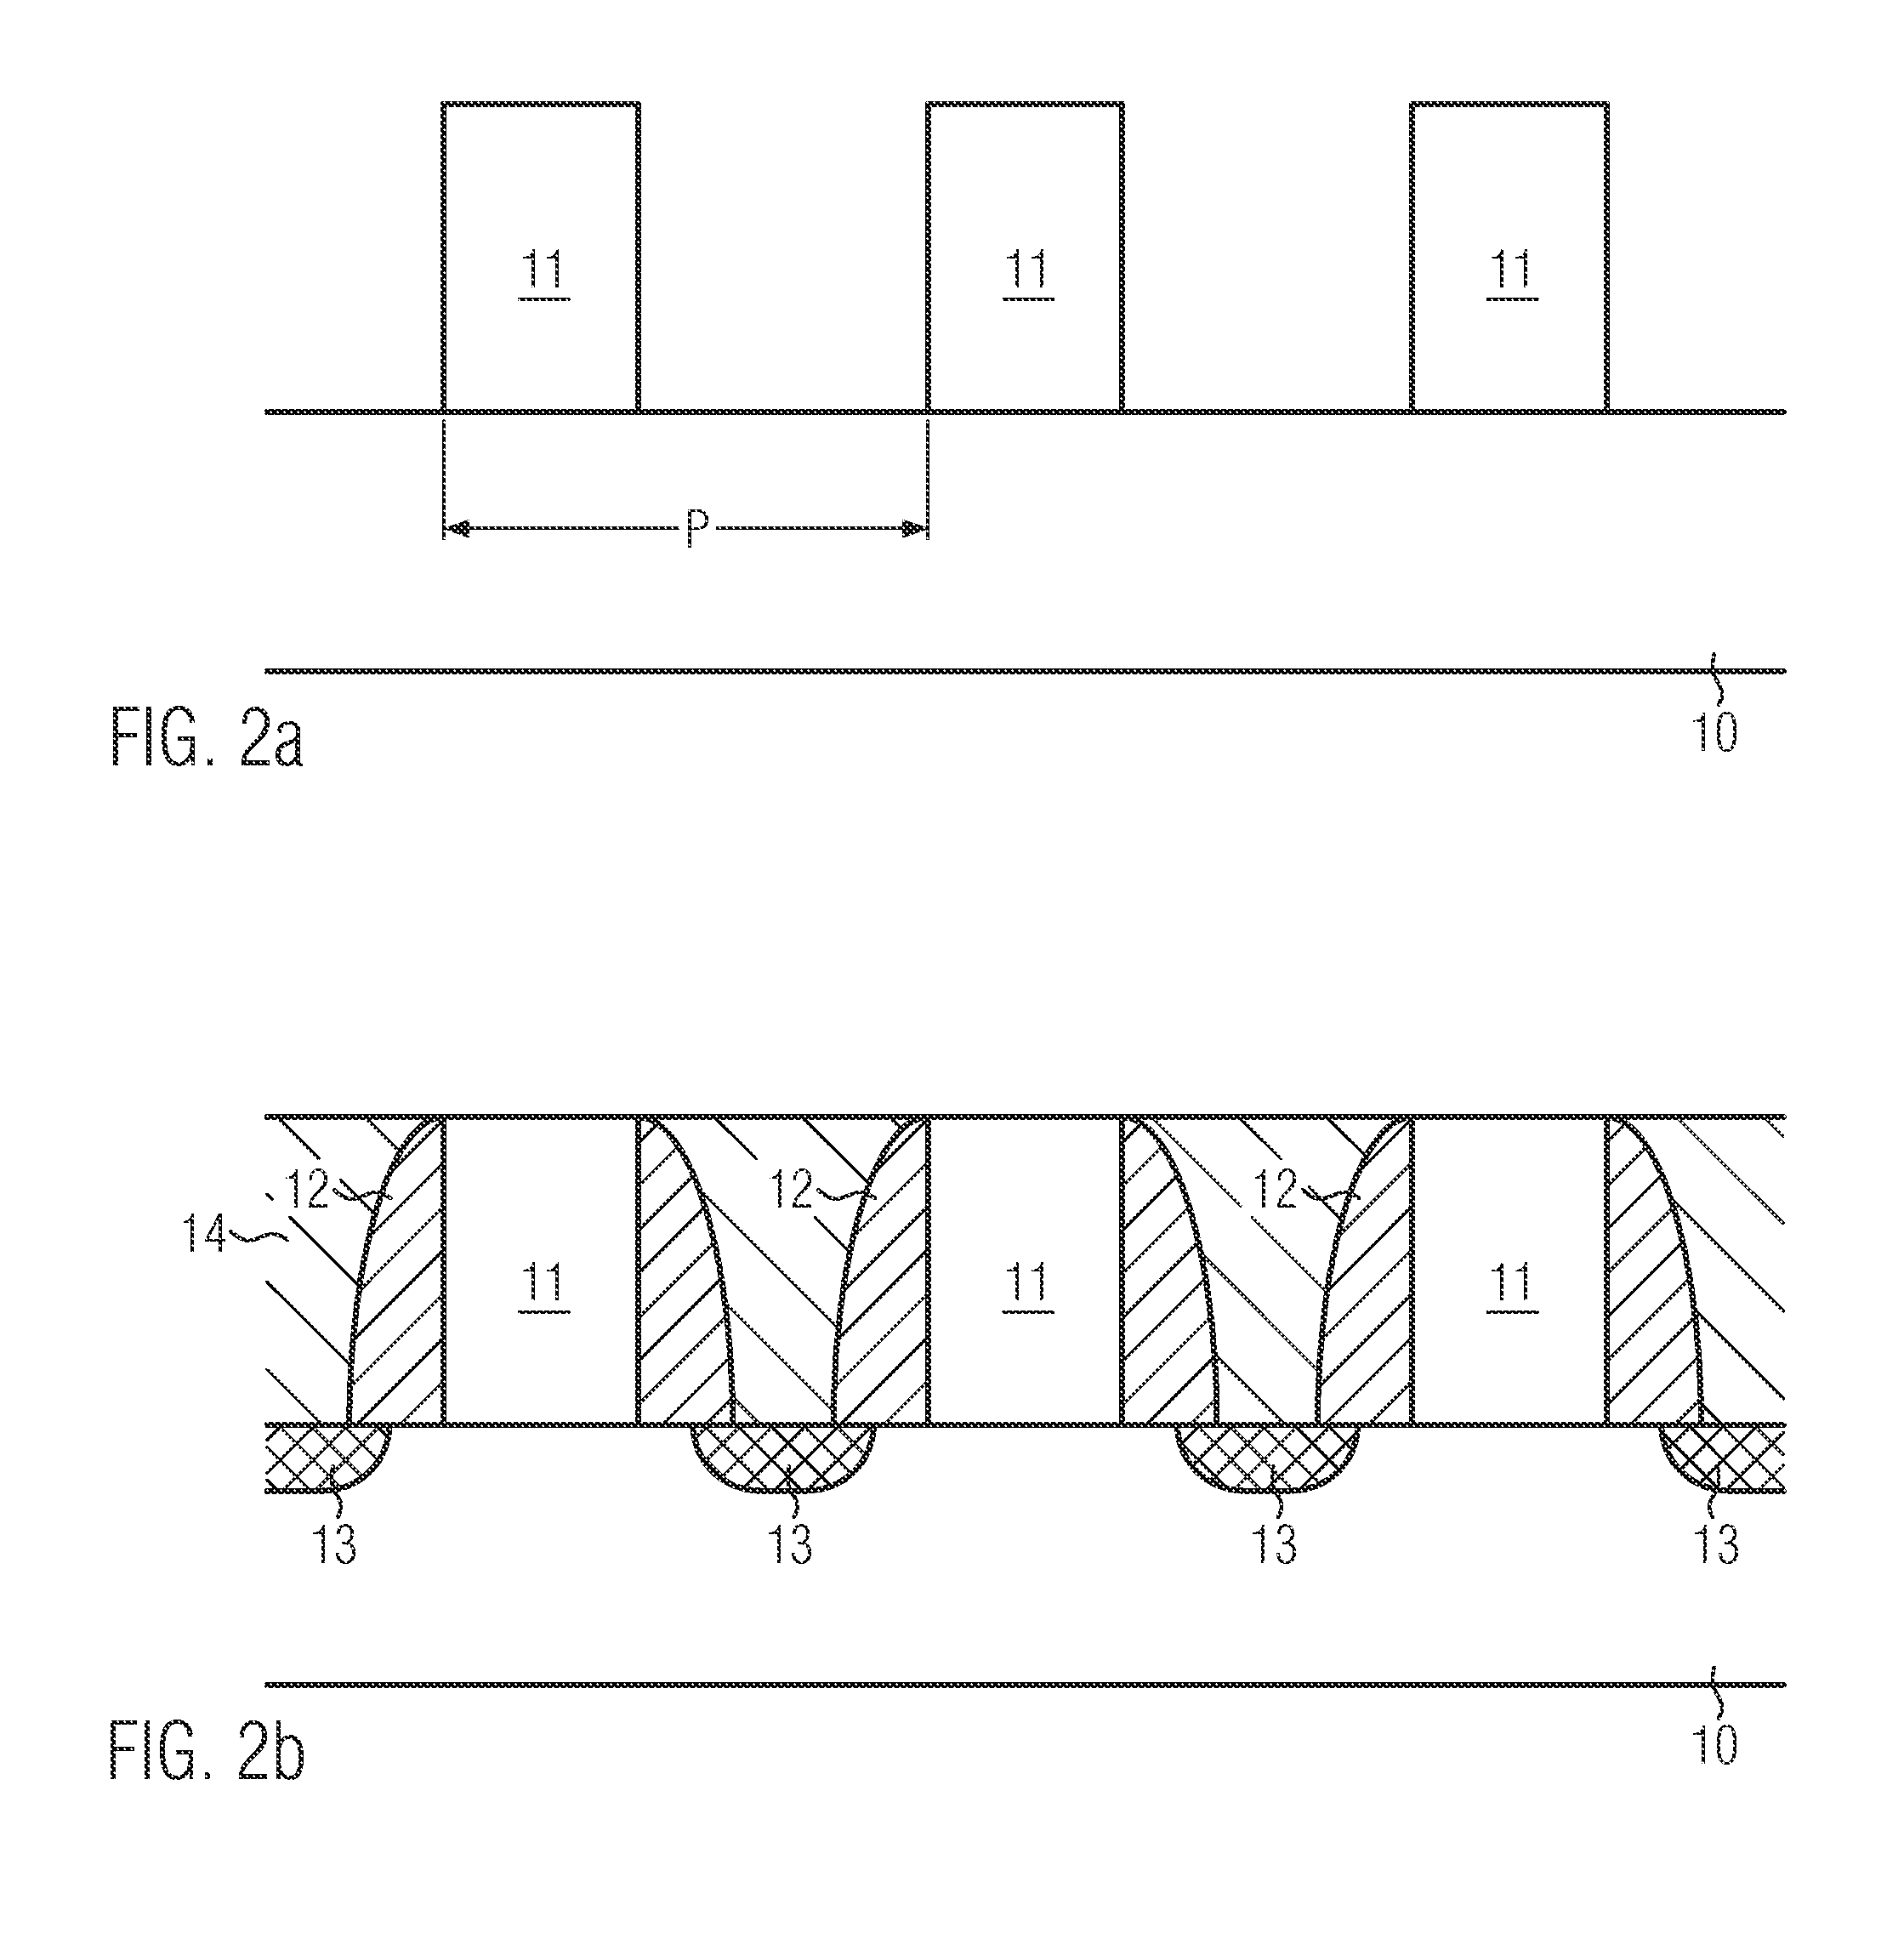 Densely packed transistor devices